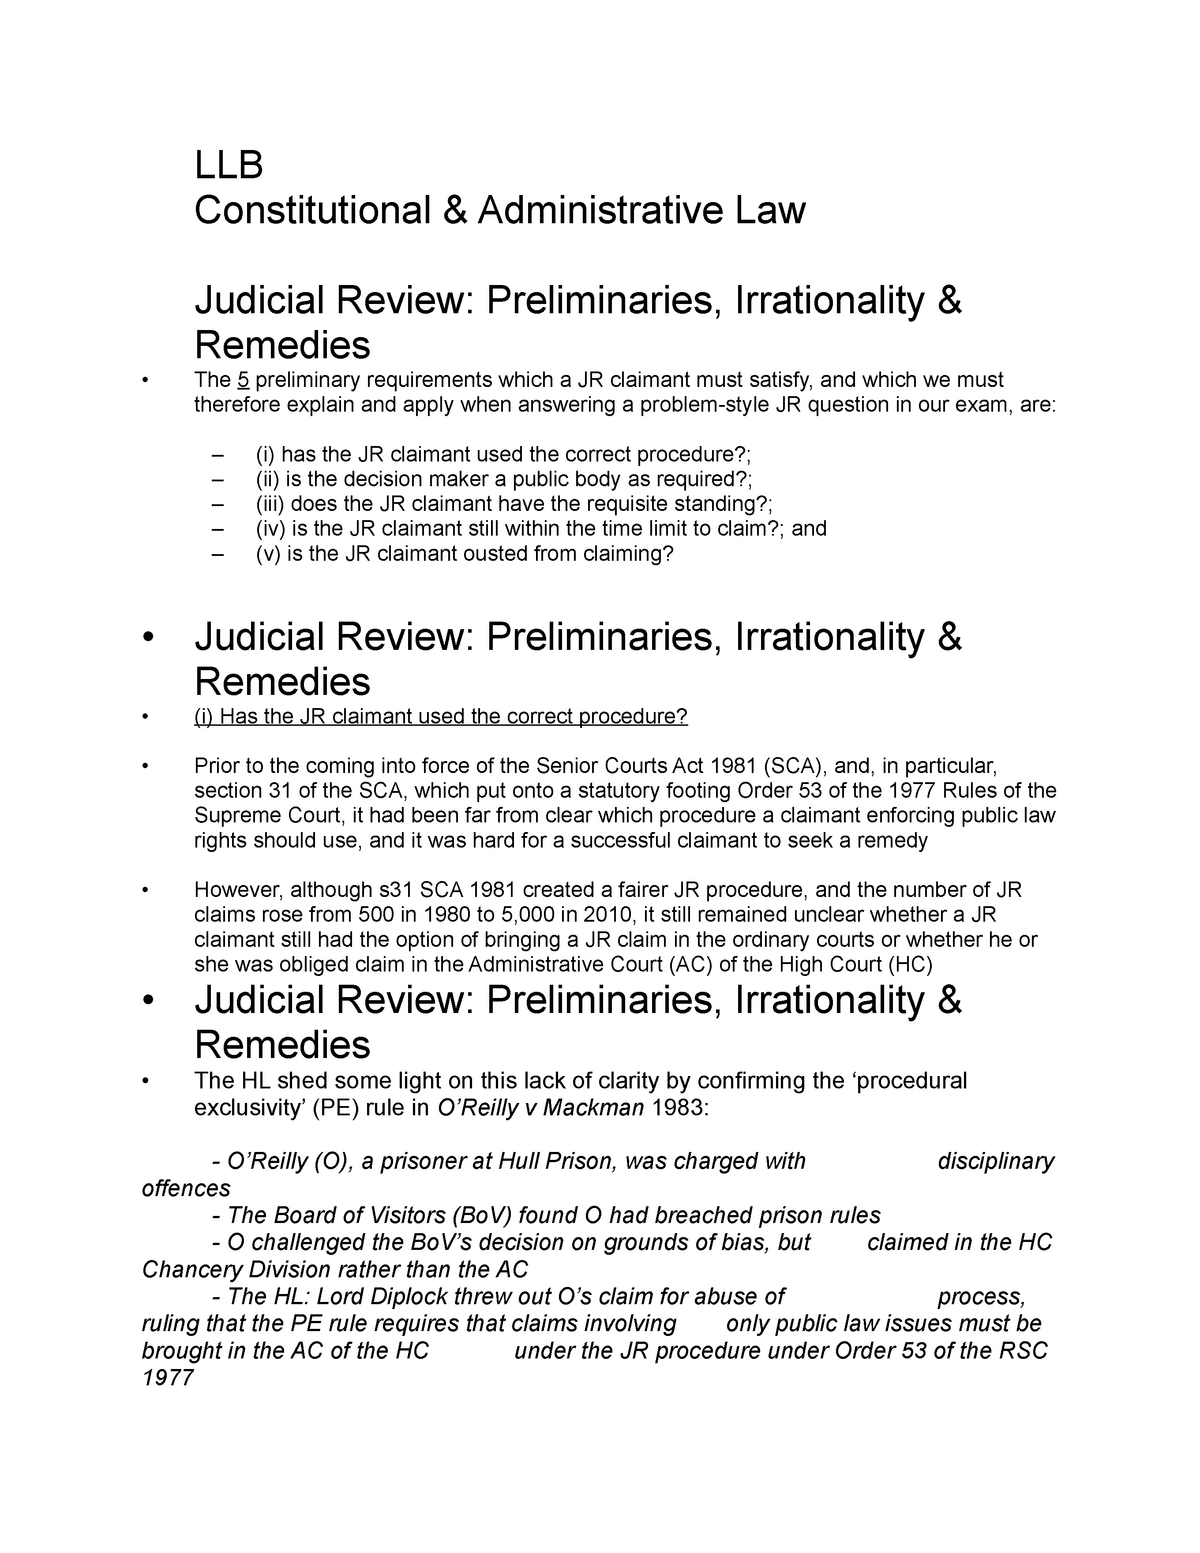 essay example on judicial review